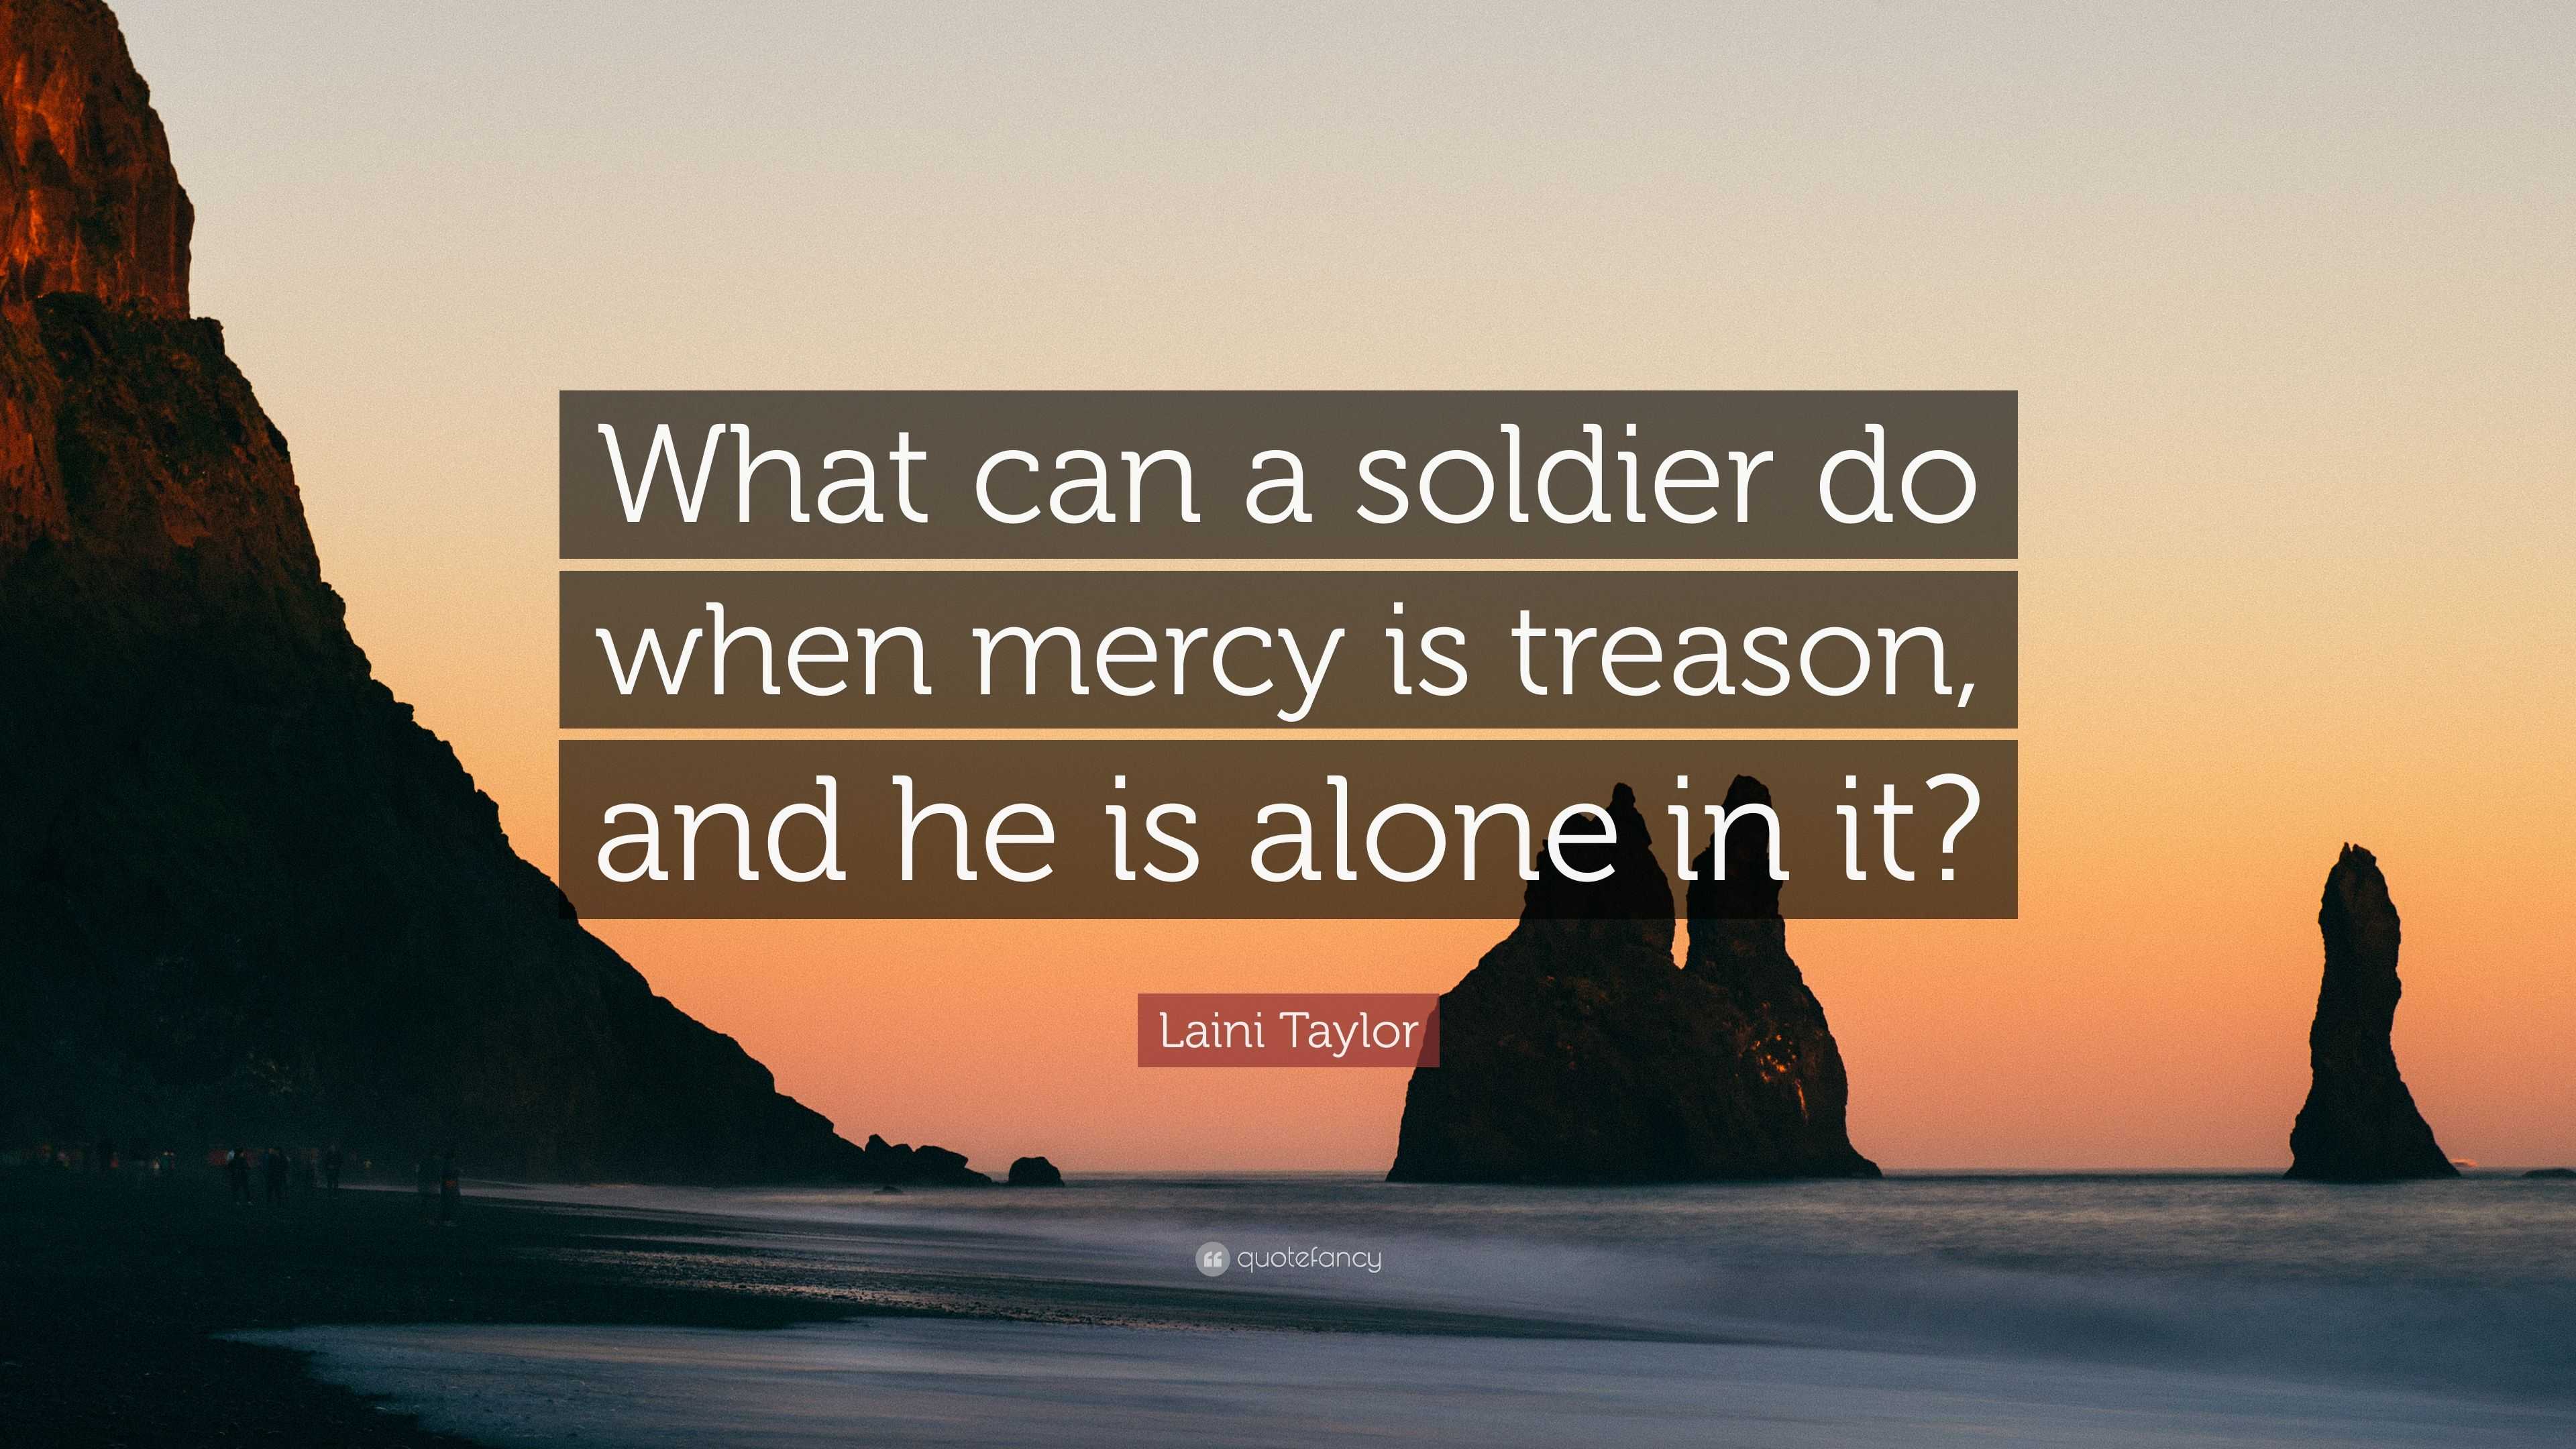 Laini Taylor Quote: “What can a soldier do when mercy is treason, and ...